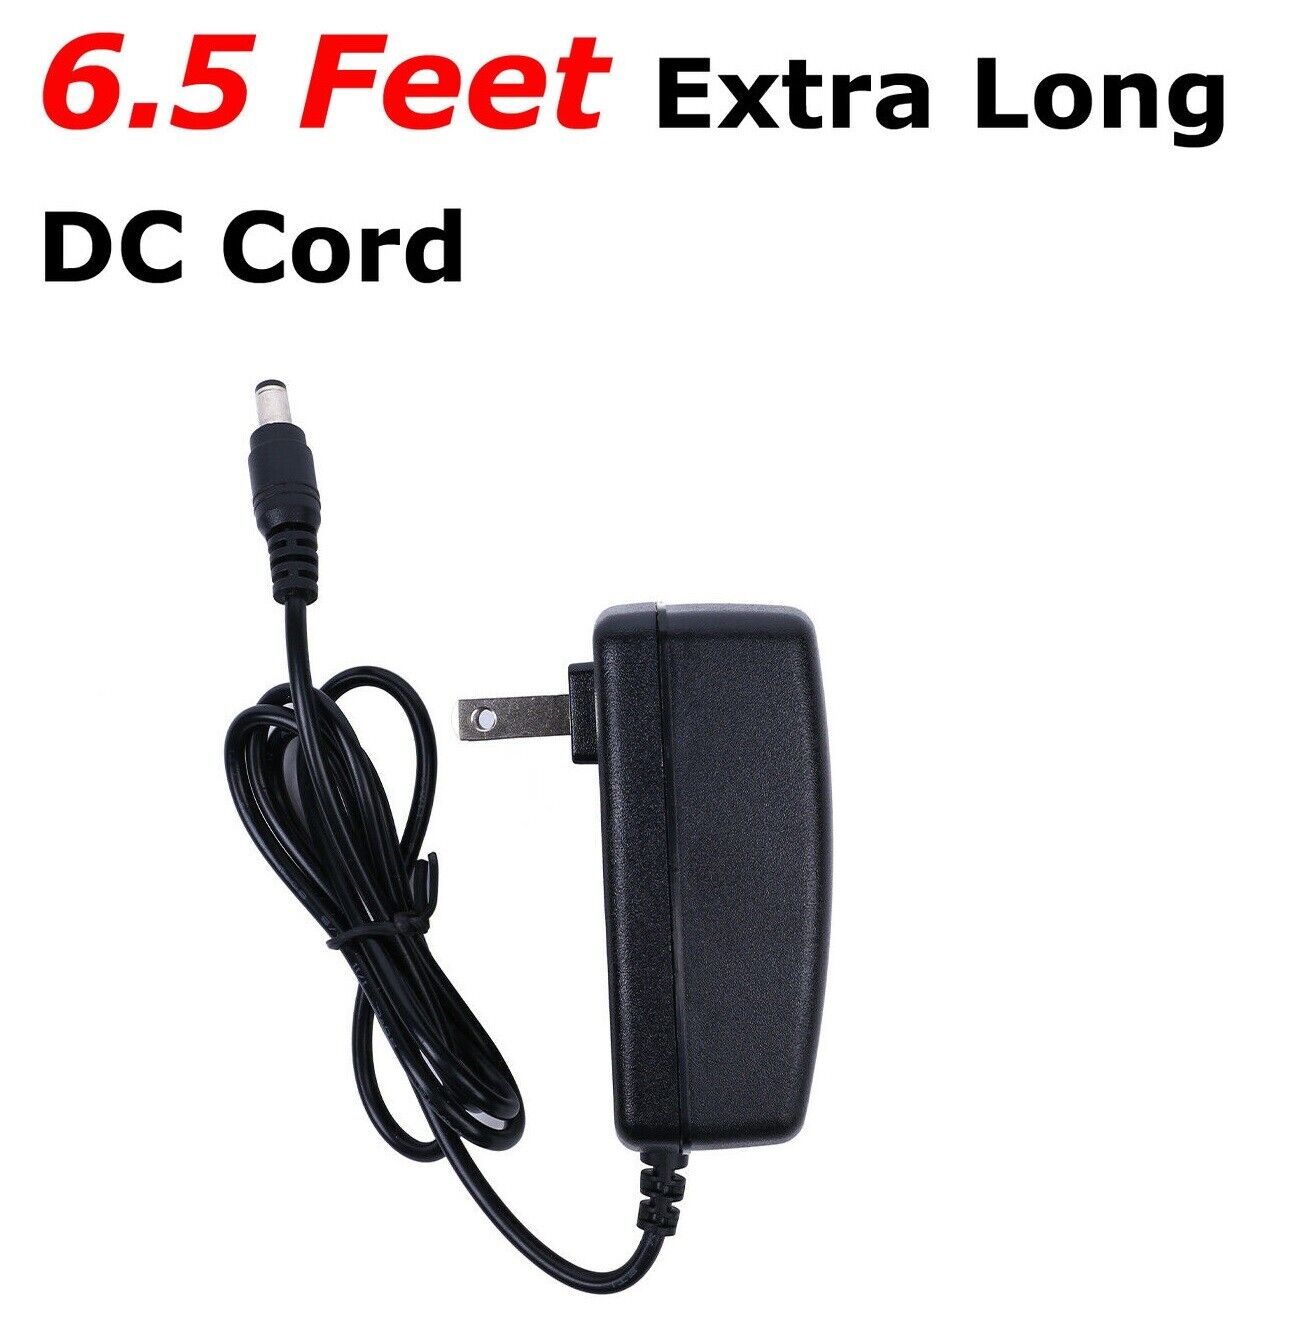 AC DC Adapter For PRETTYCARE W100 W200 W300 Cordless Vacuum Cleaner Power Supply